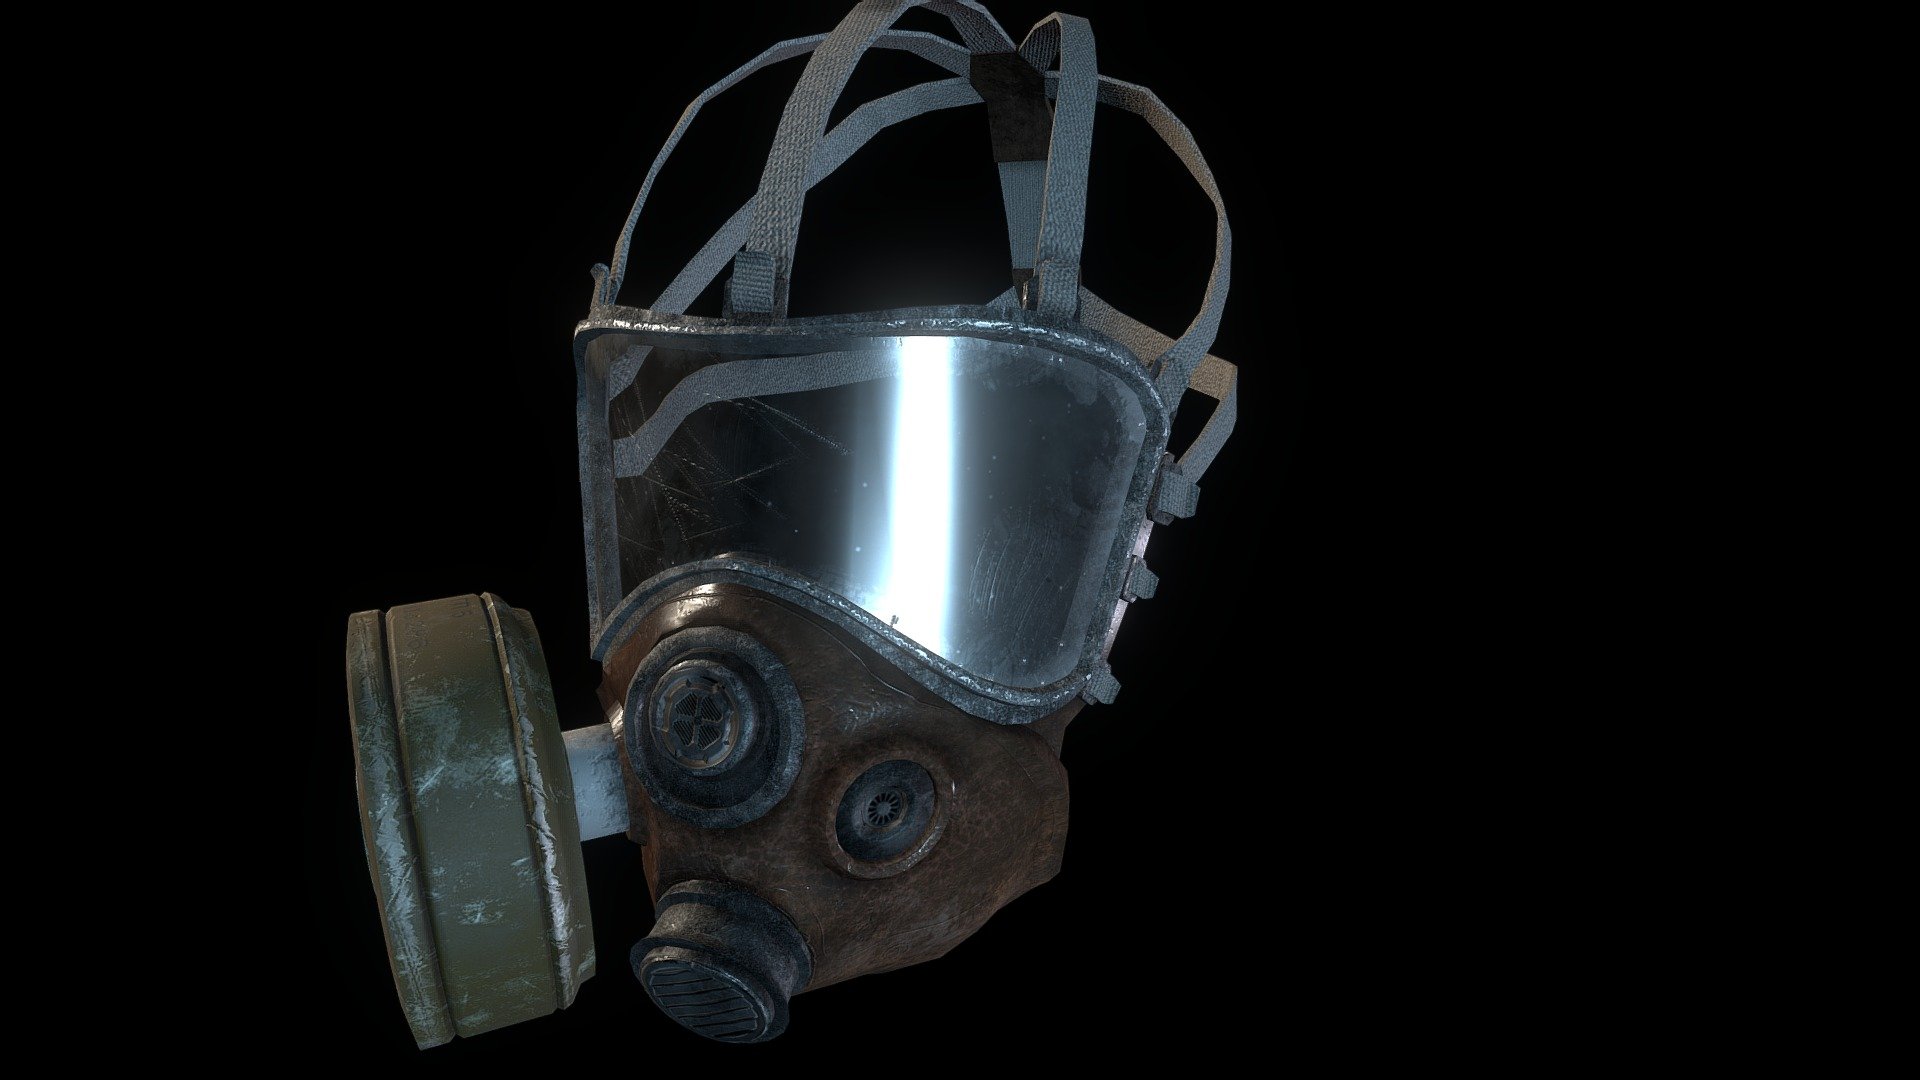 Game ready model, originally made as a mod for Dayz, based on Anna's gas mask from Metro Exodus 3d model